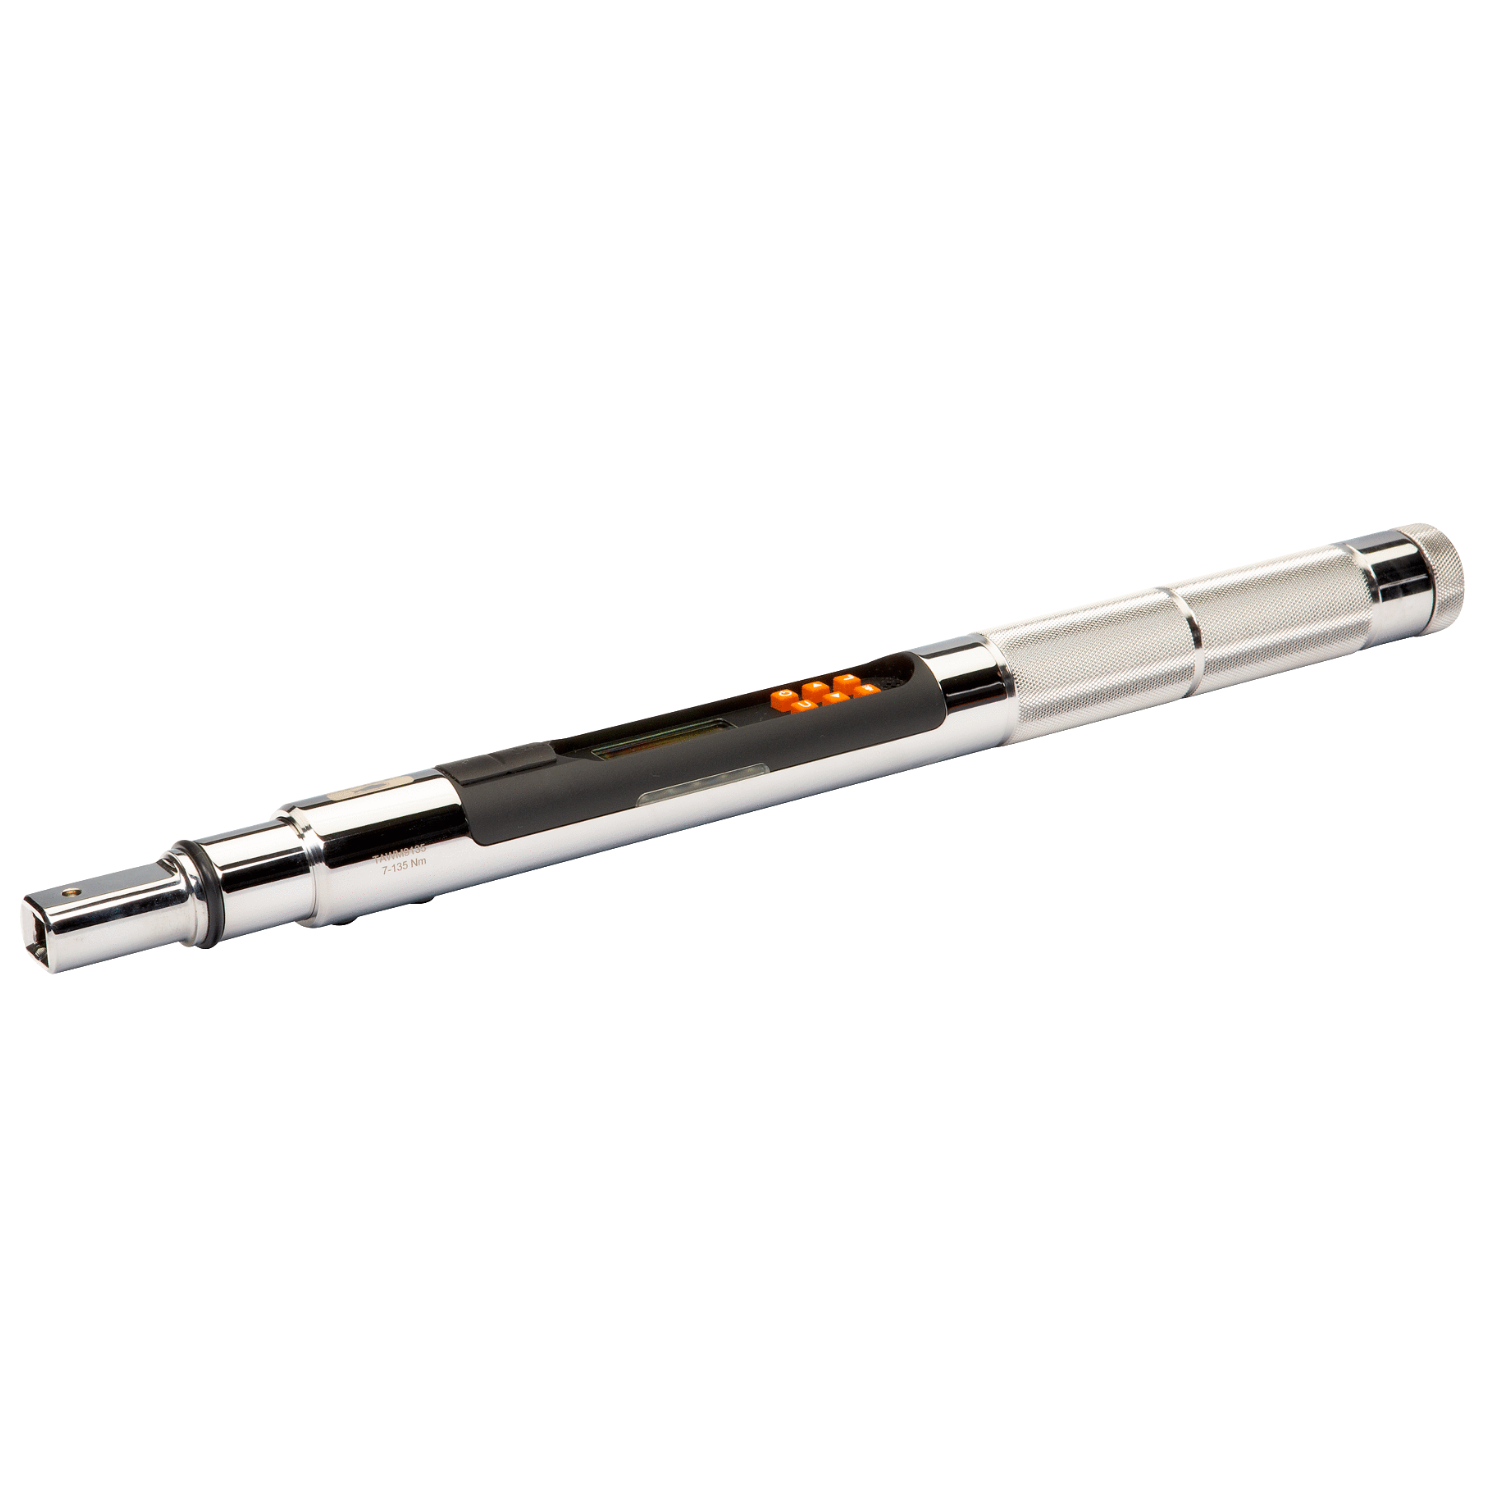 BAHCO TAWM9_14_24 Electronic Torque & Angle Wrench (BAHCO Tools) - Premium Torque & Angle Wrench from BAHCO - Shop now at Yew Aik.